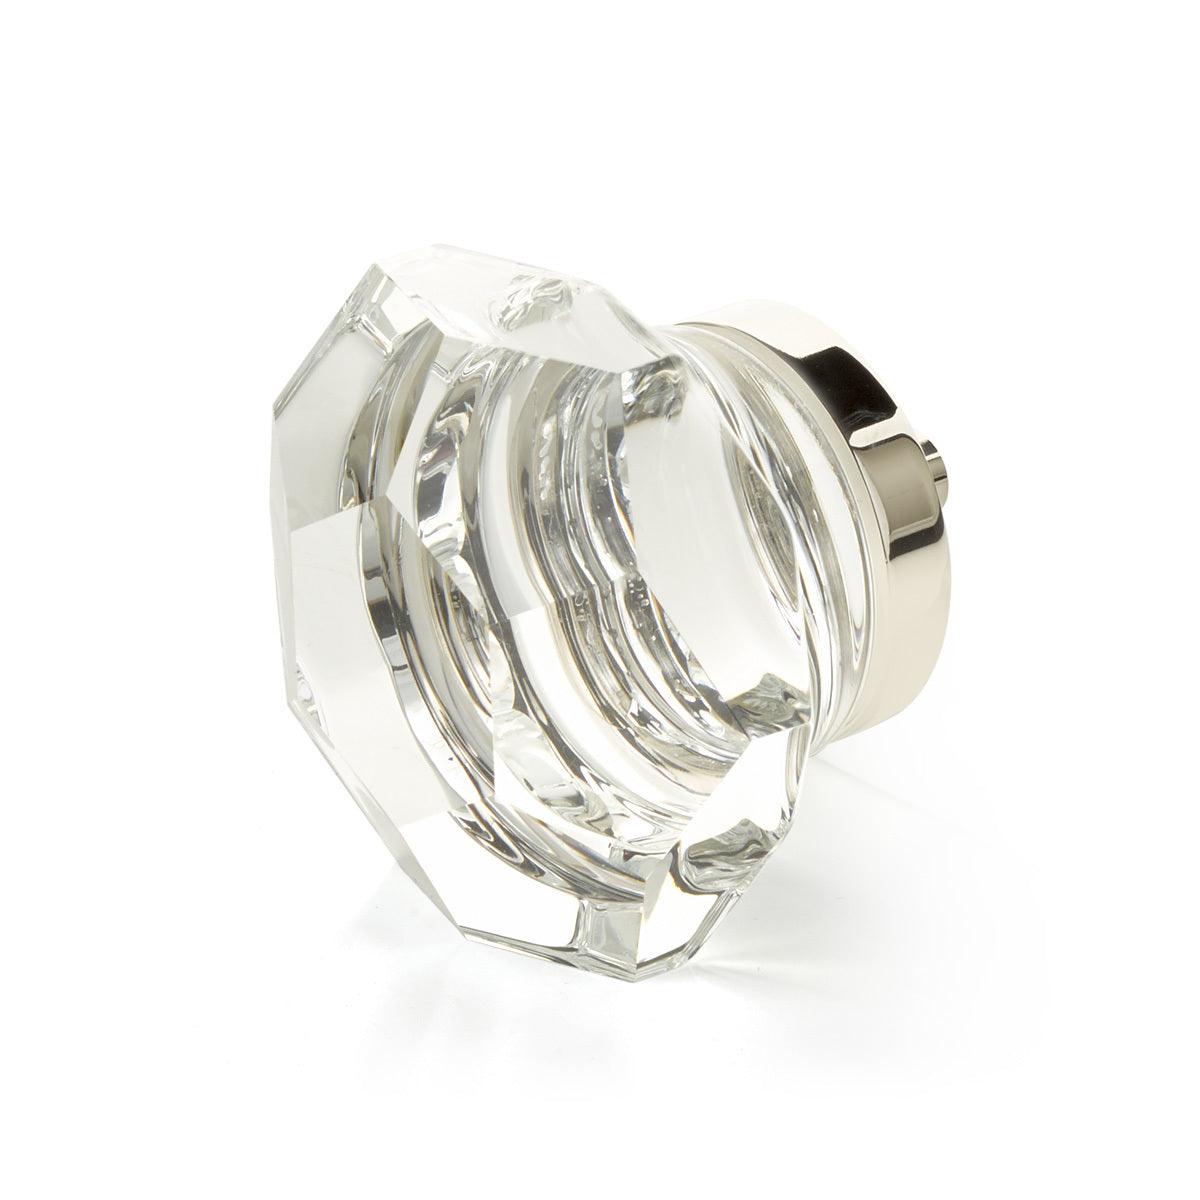 Schaub - City Lights Faceted Dome Glass Knob - 54-PN | Montreal Lighting & Hardware